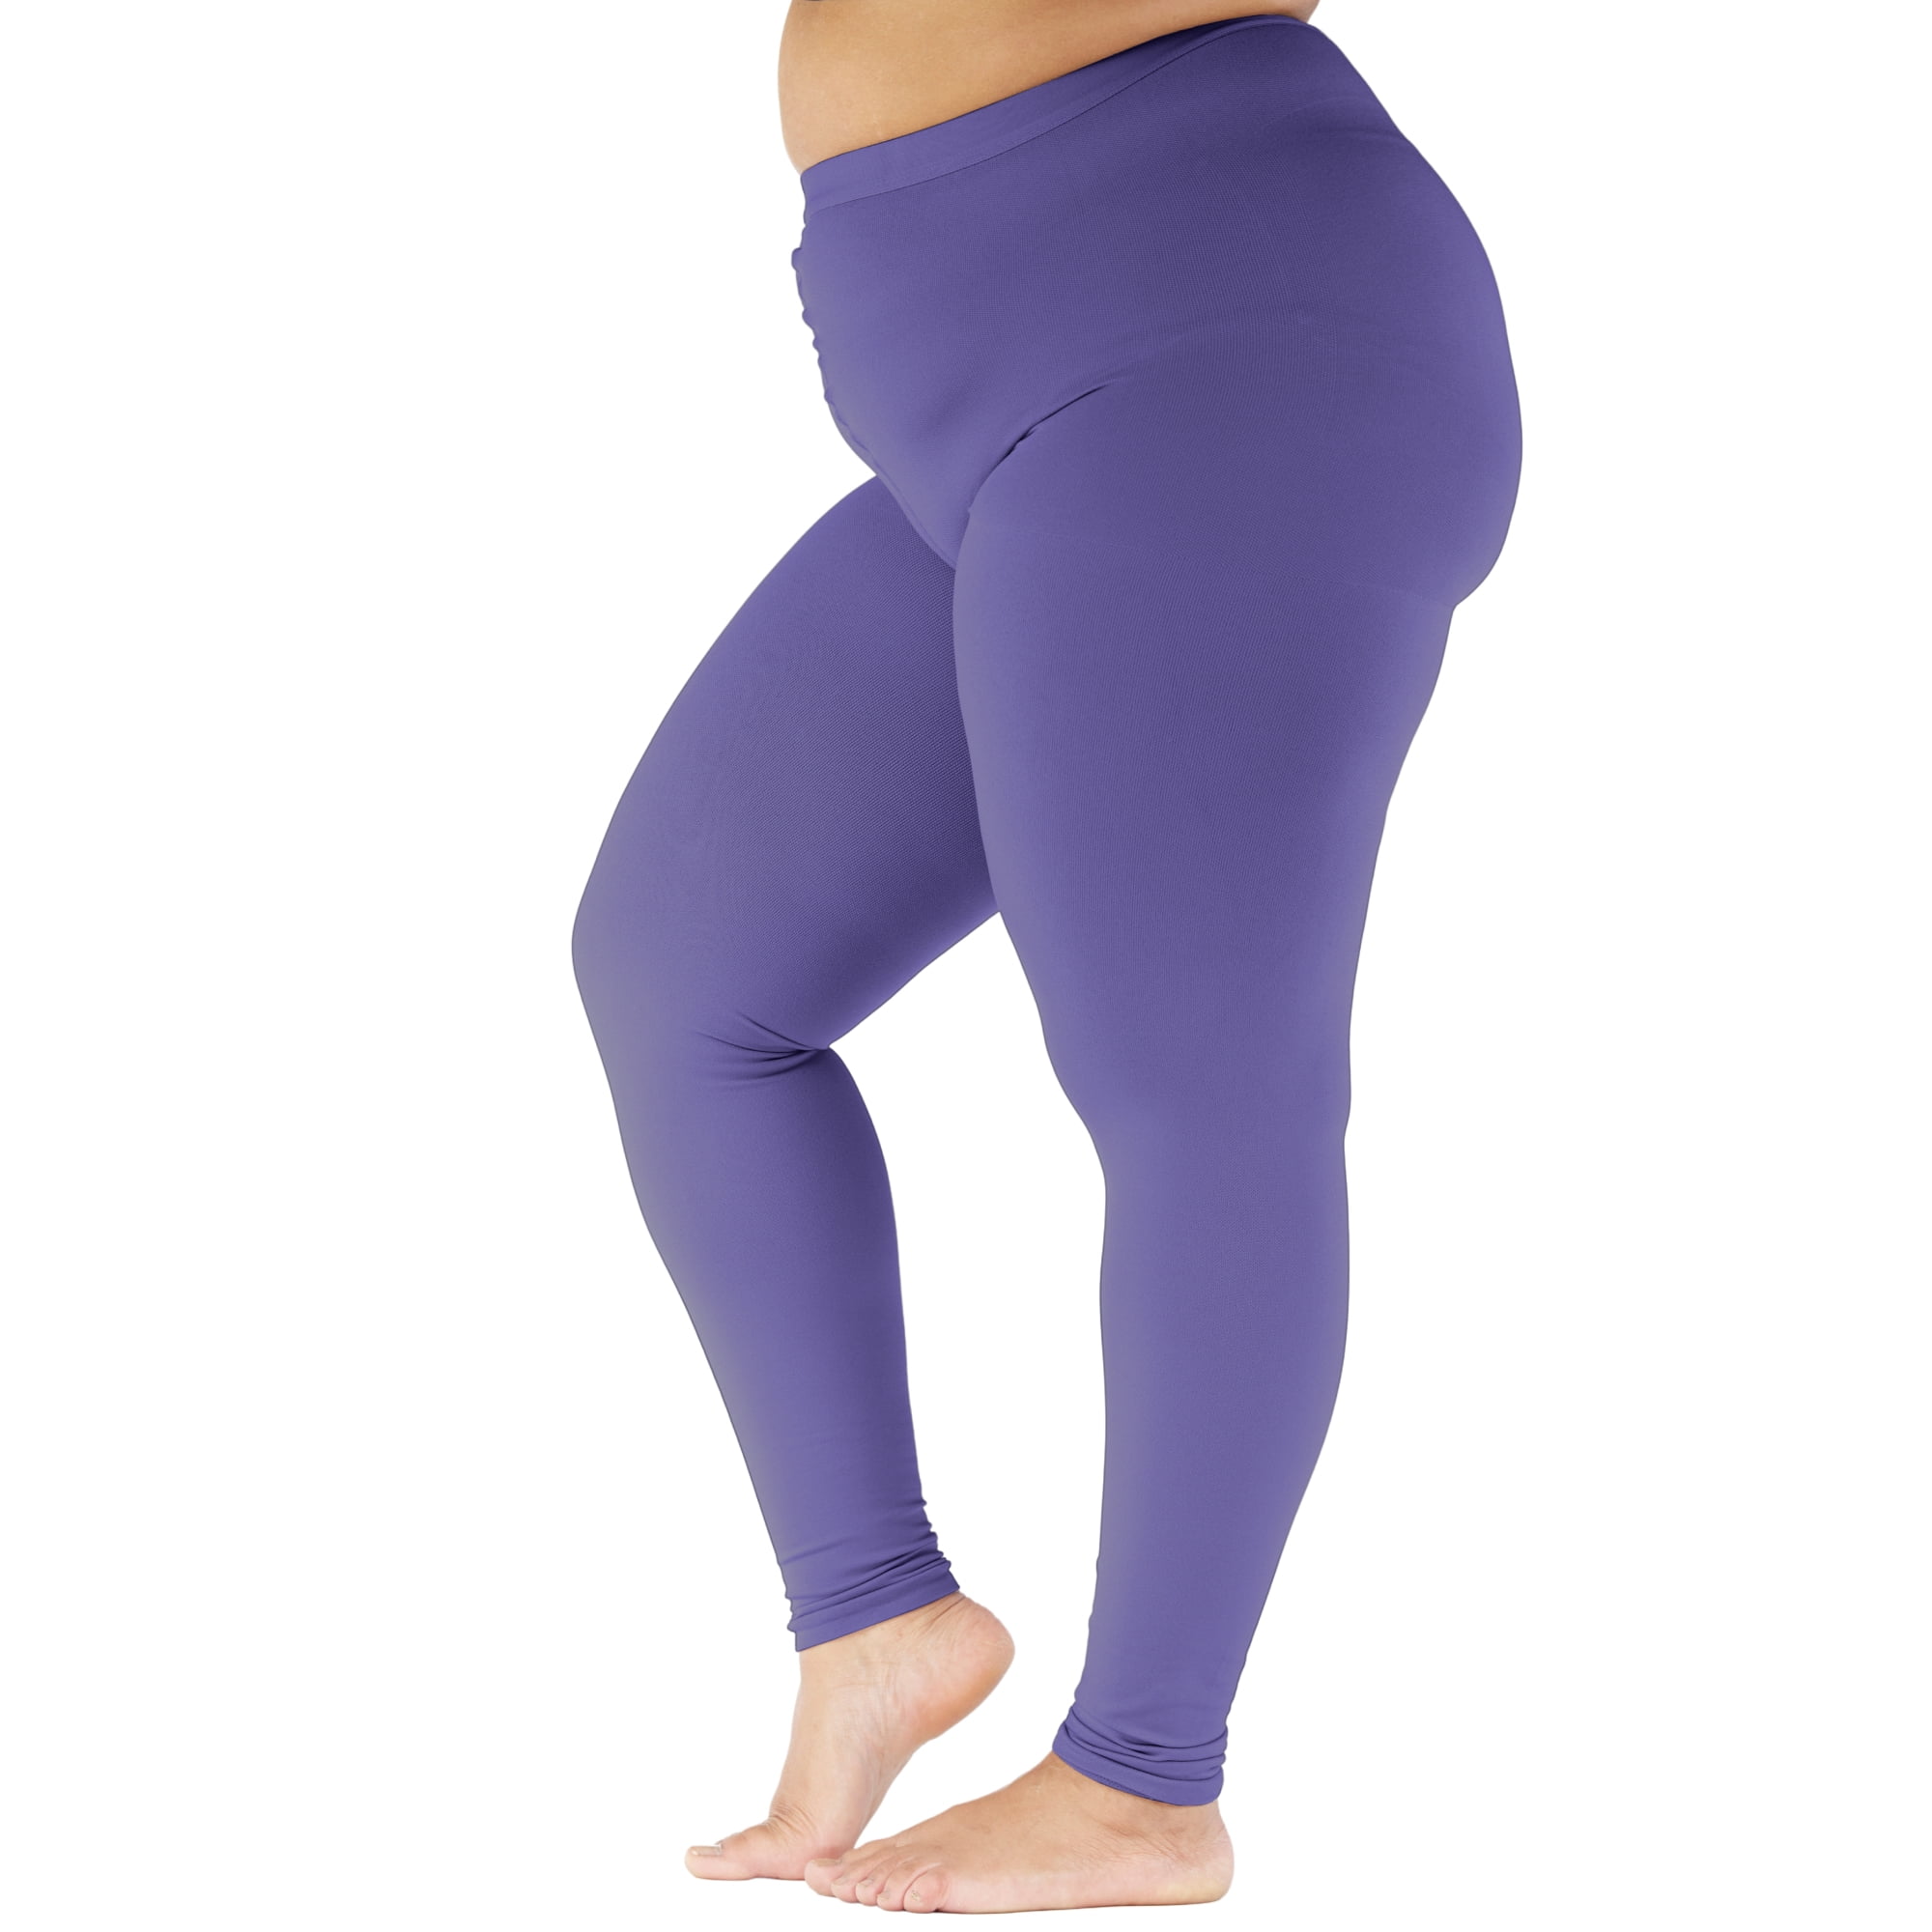 Extra Large Compression Leggings for Women 20-30mmHg Swelling - Purple, 5X- Large 